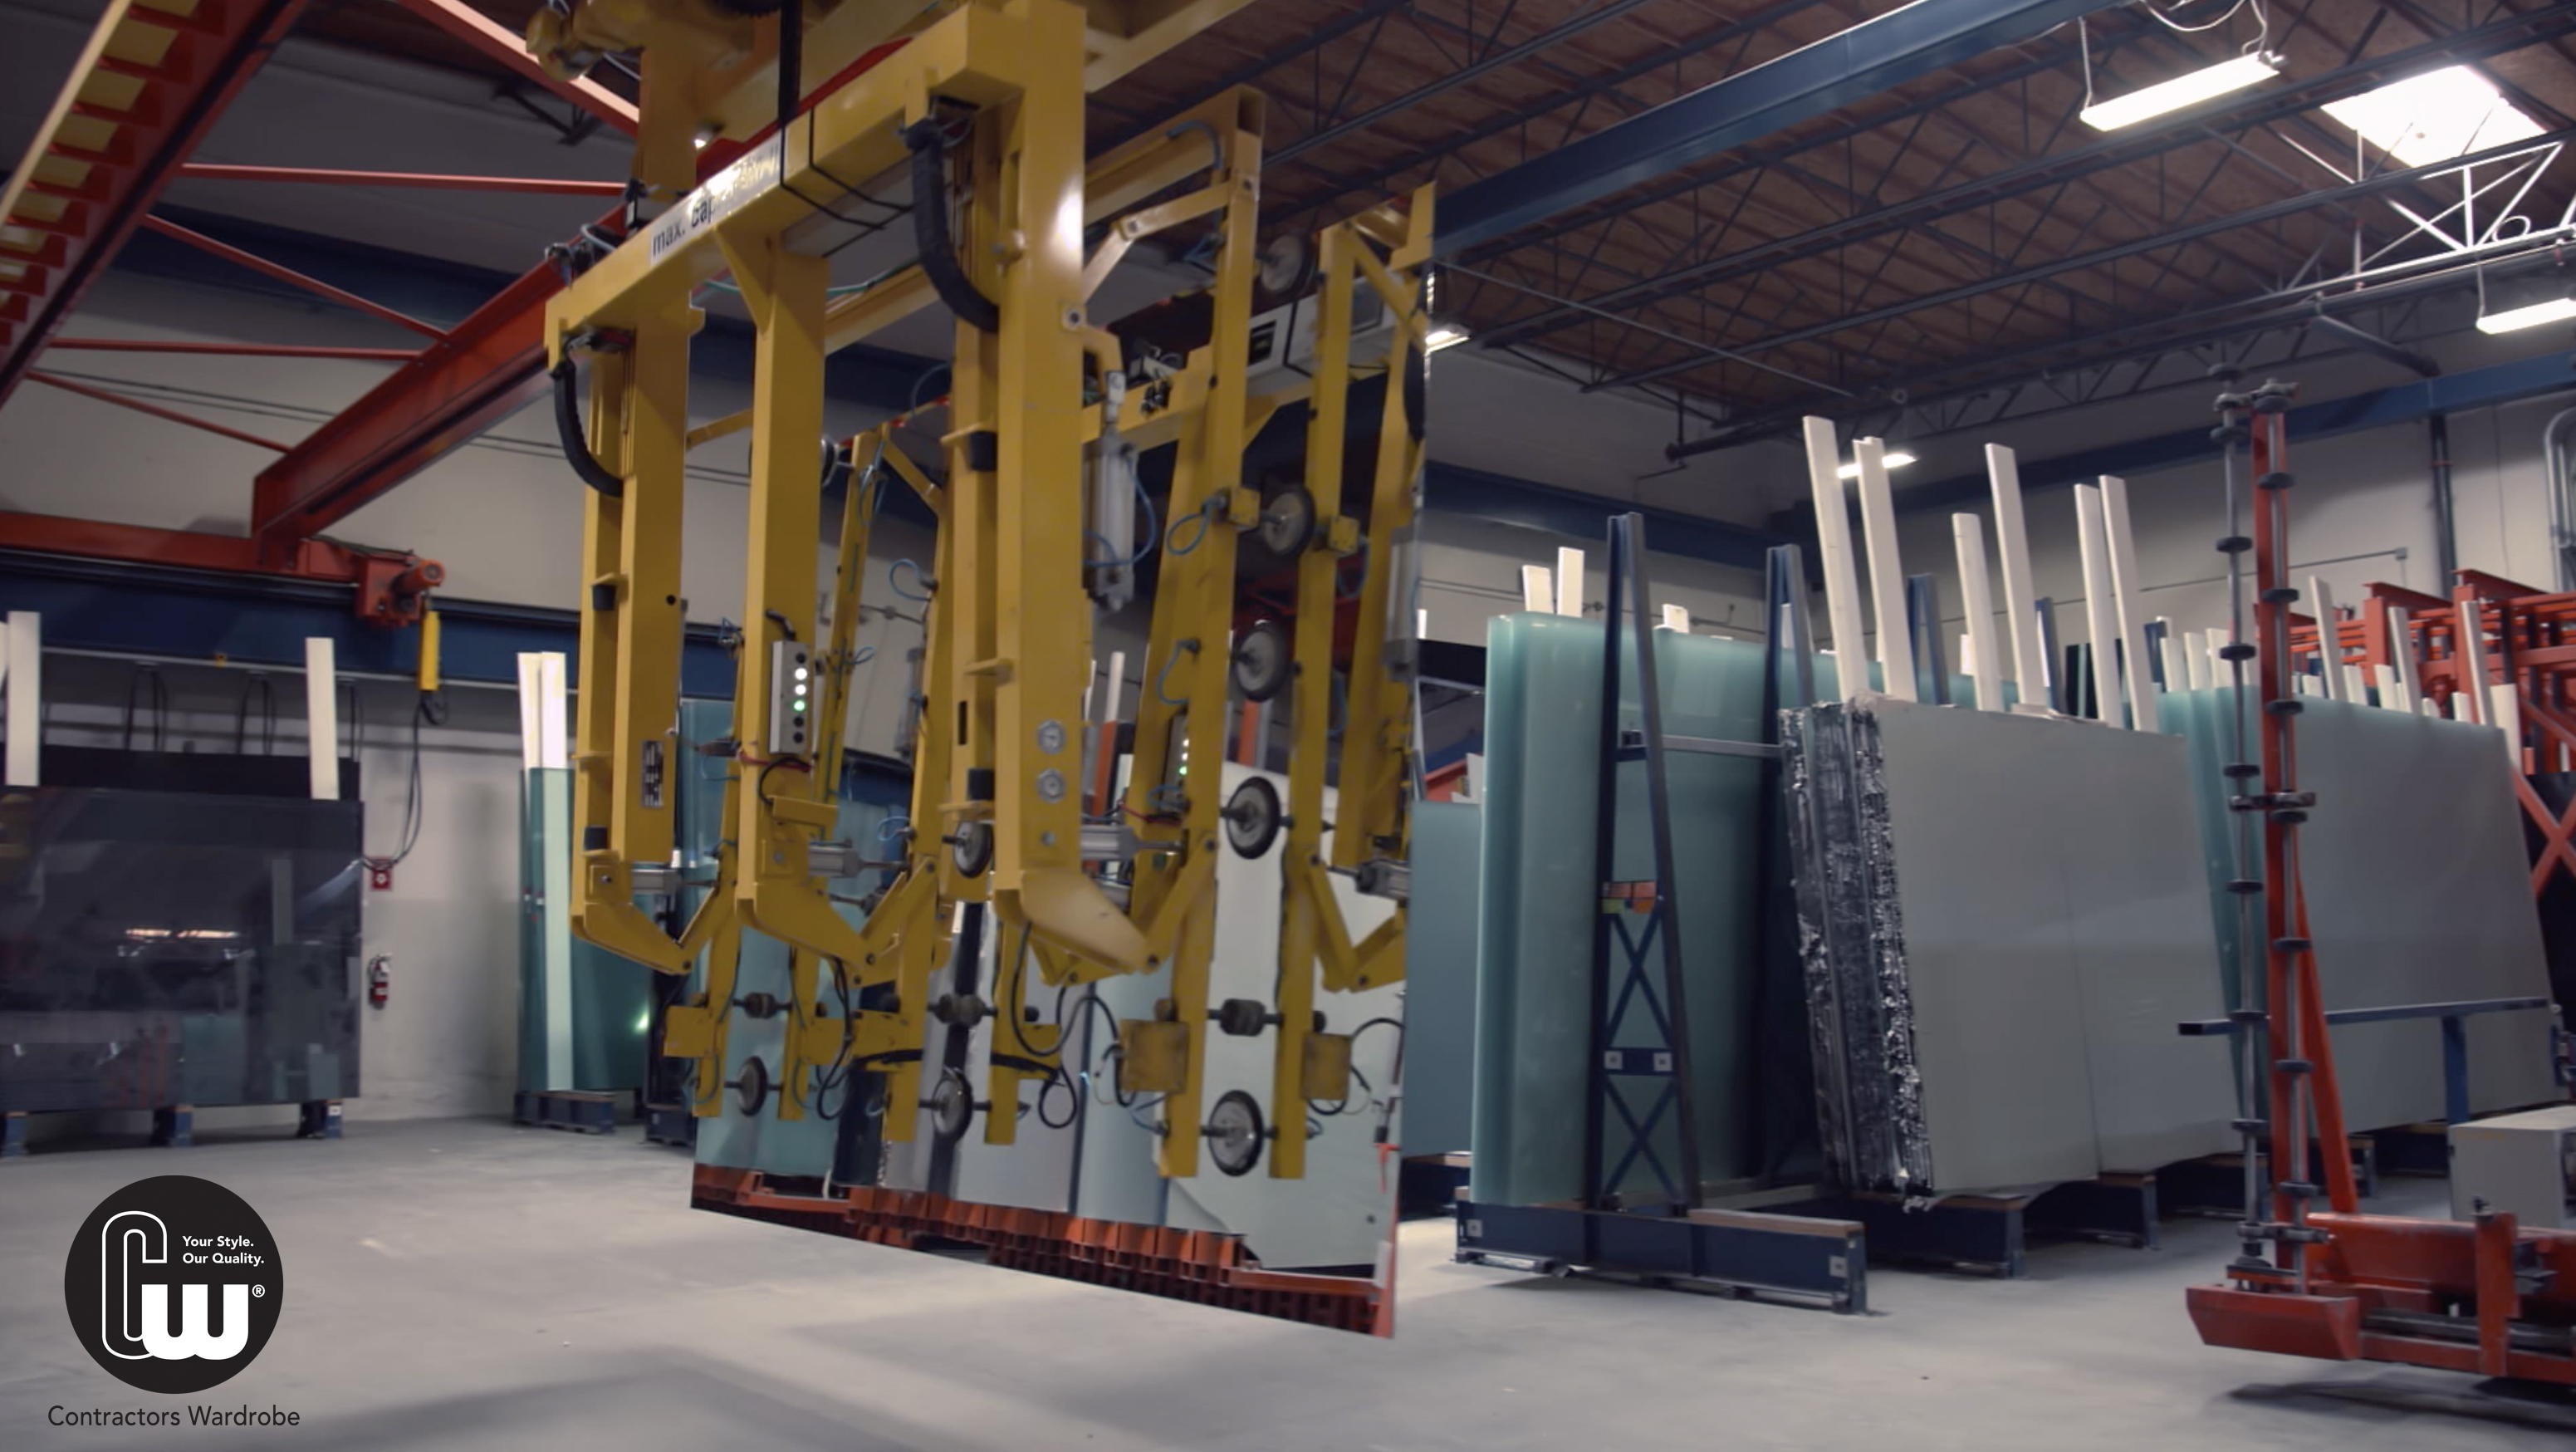 Contractors Wardrobe (Cw Doors®) Premieres New Corporate Video for National Manufacturing Day